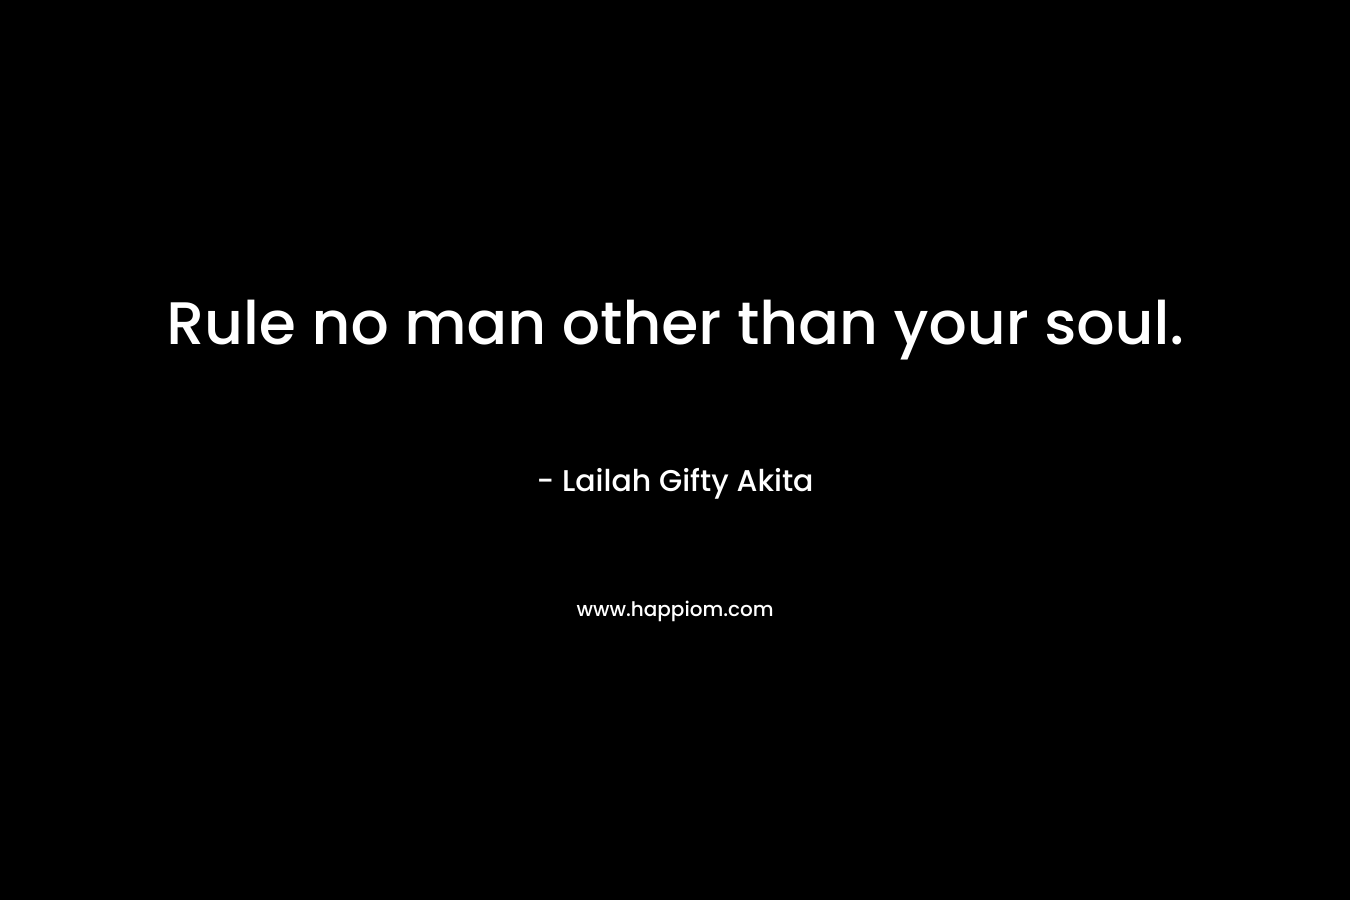 Rule no man other than your soul.